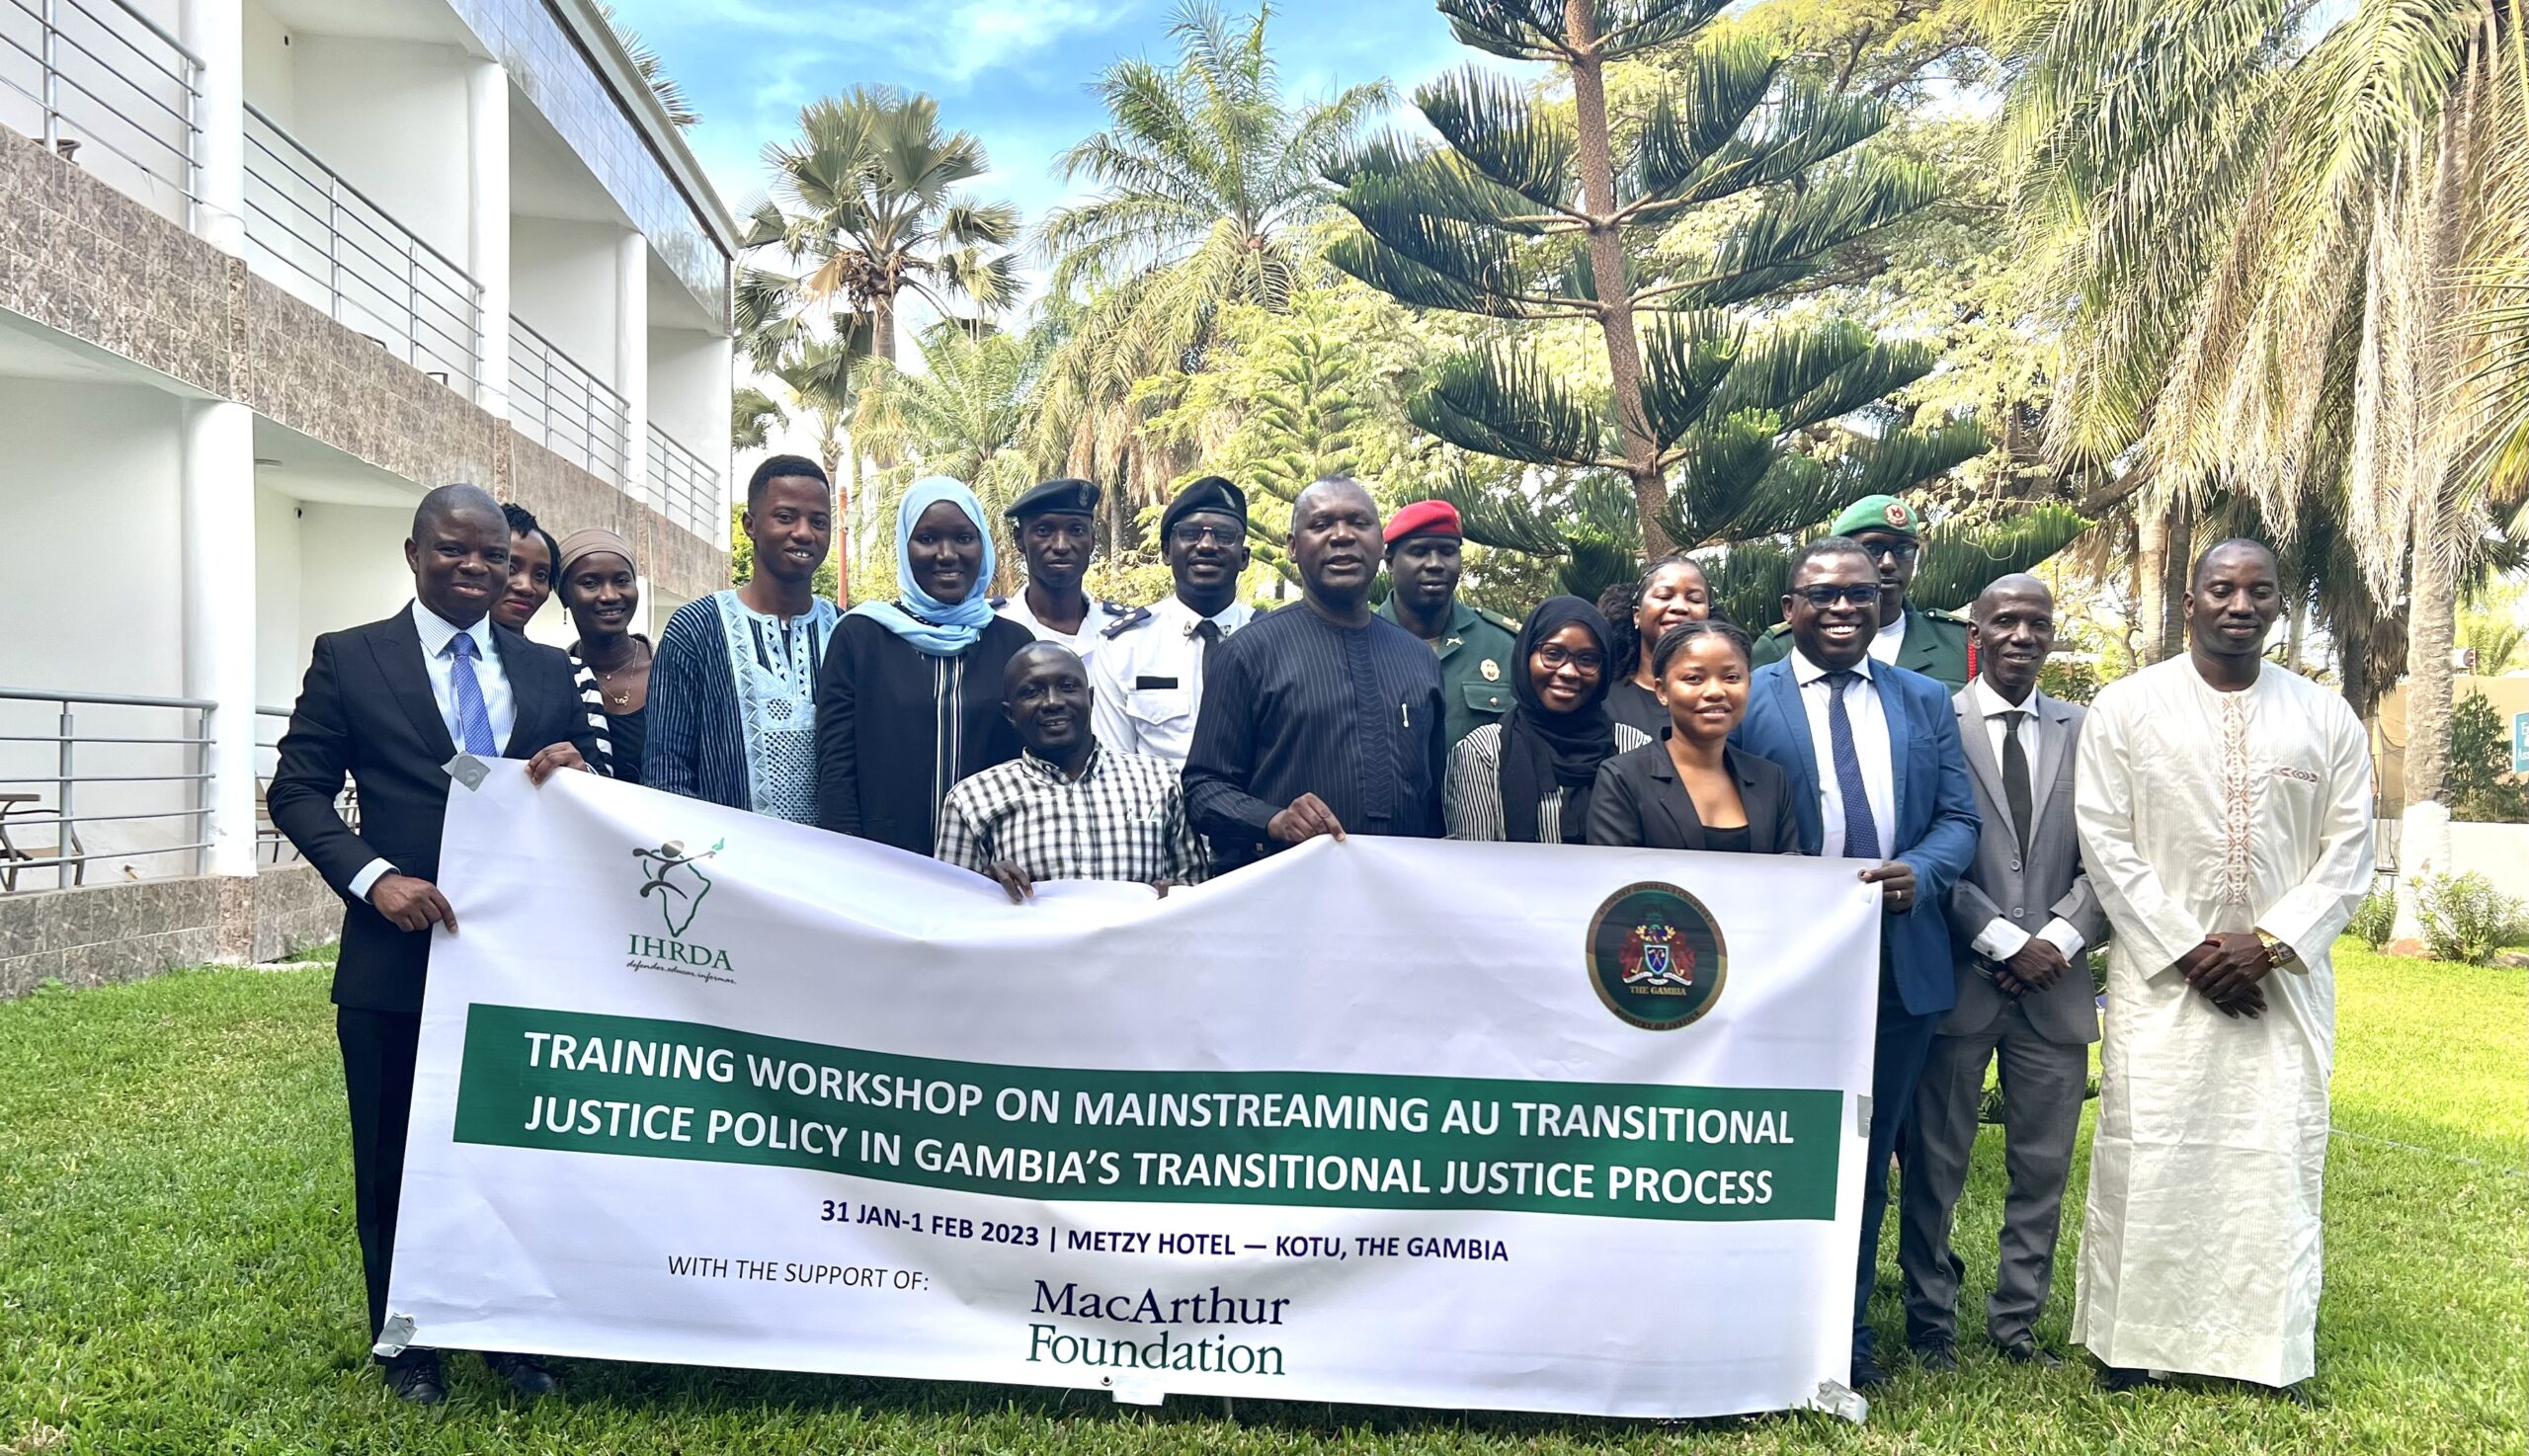 <strong>IHRDA sensitizes key Gambia justice sector stakeholders on application of AUTJP in Gambia’s transitional justice processes</strong>